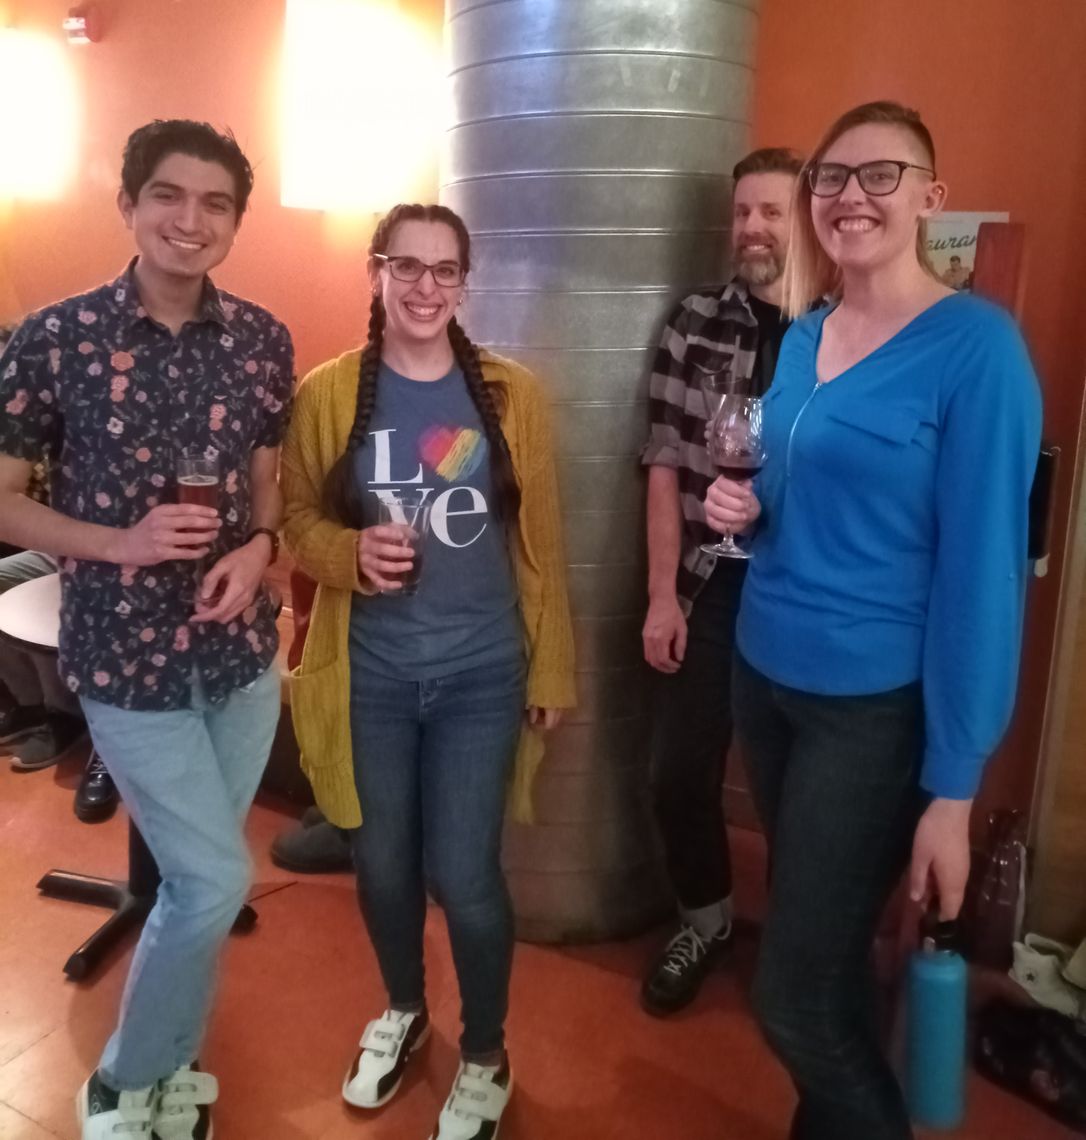 Four lab members stand together and smile for the photo in the bowling alley